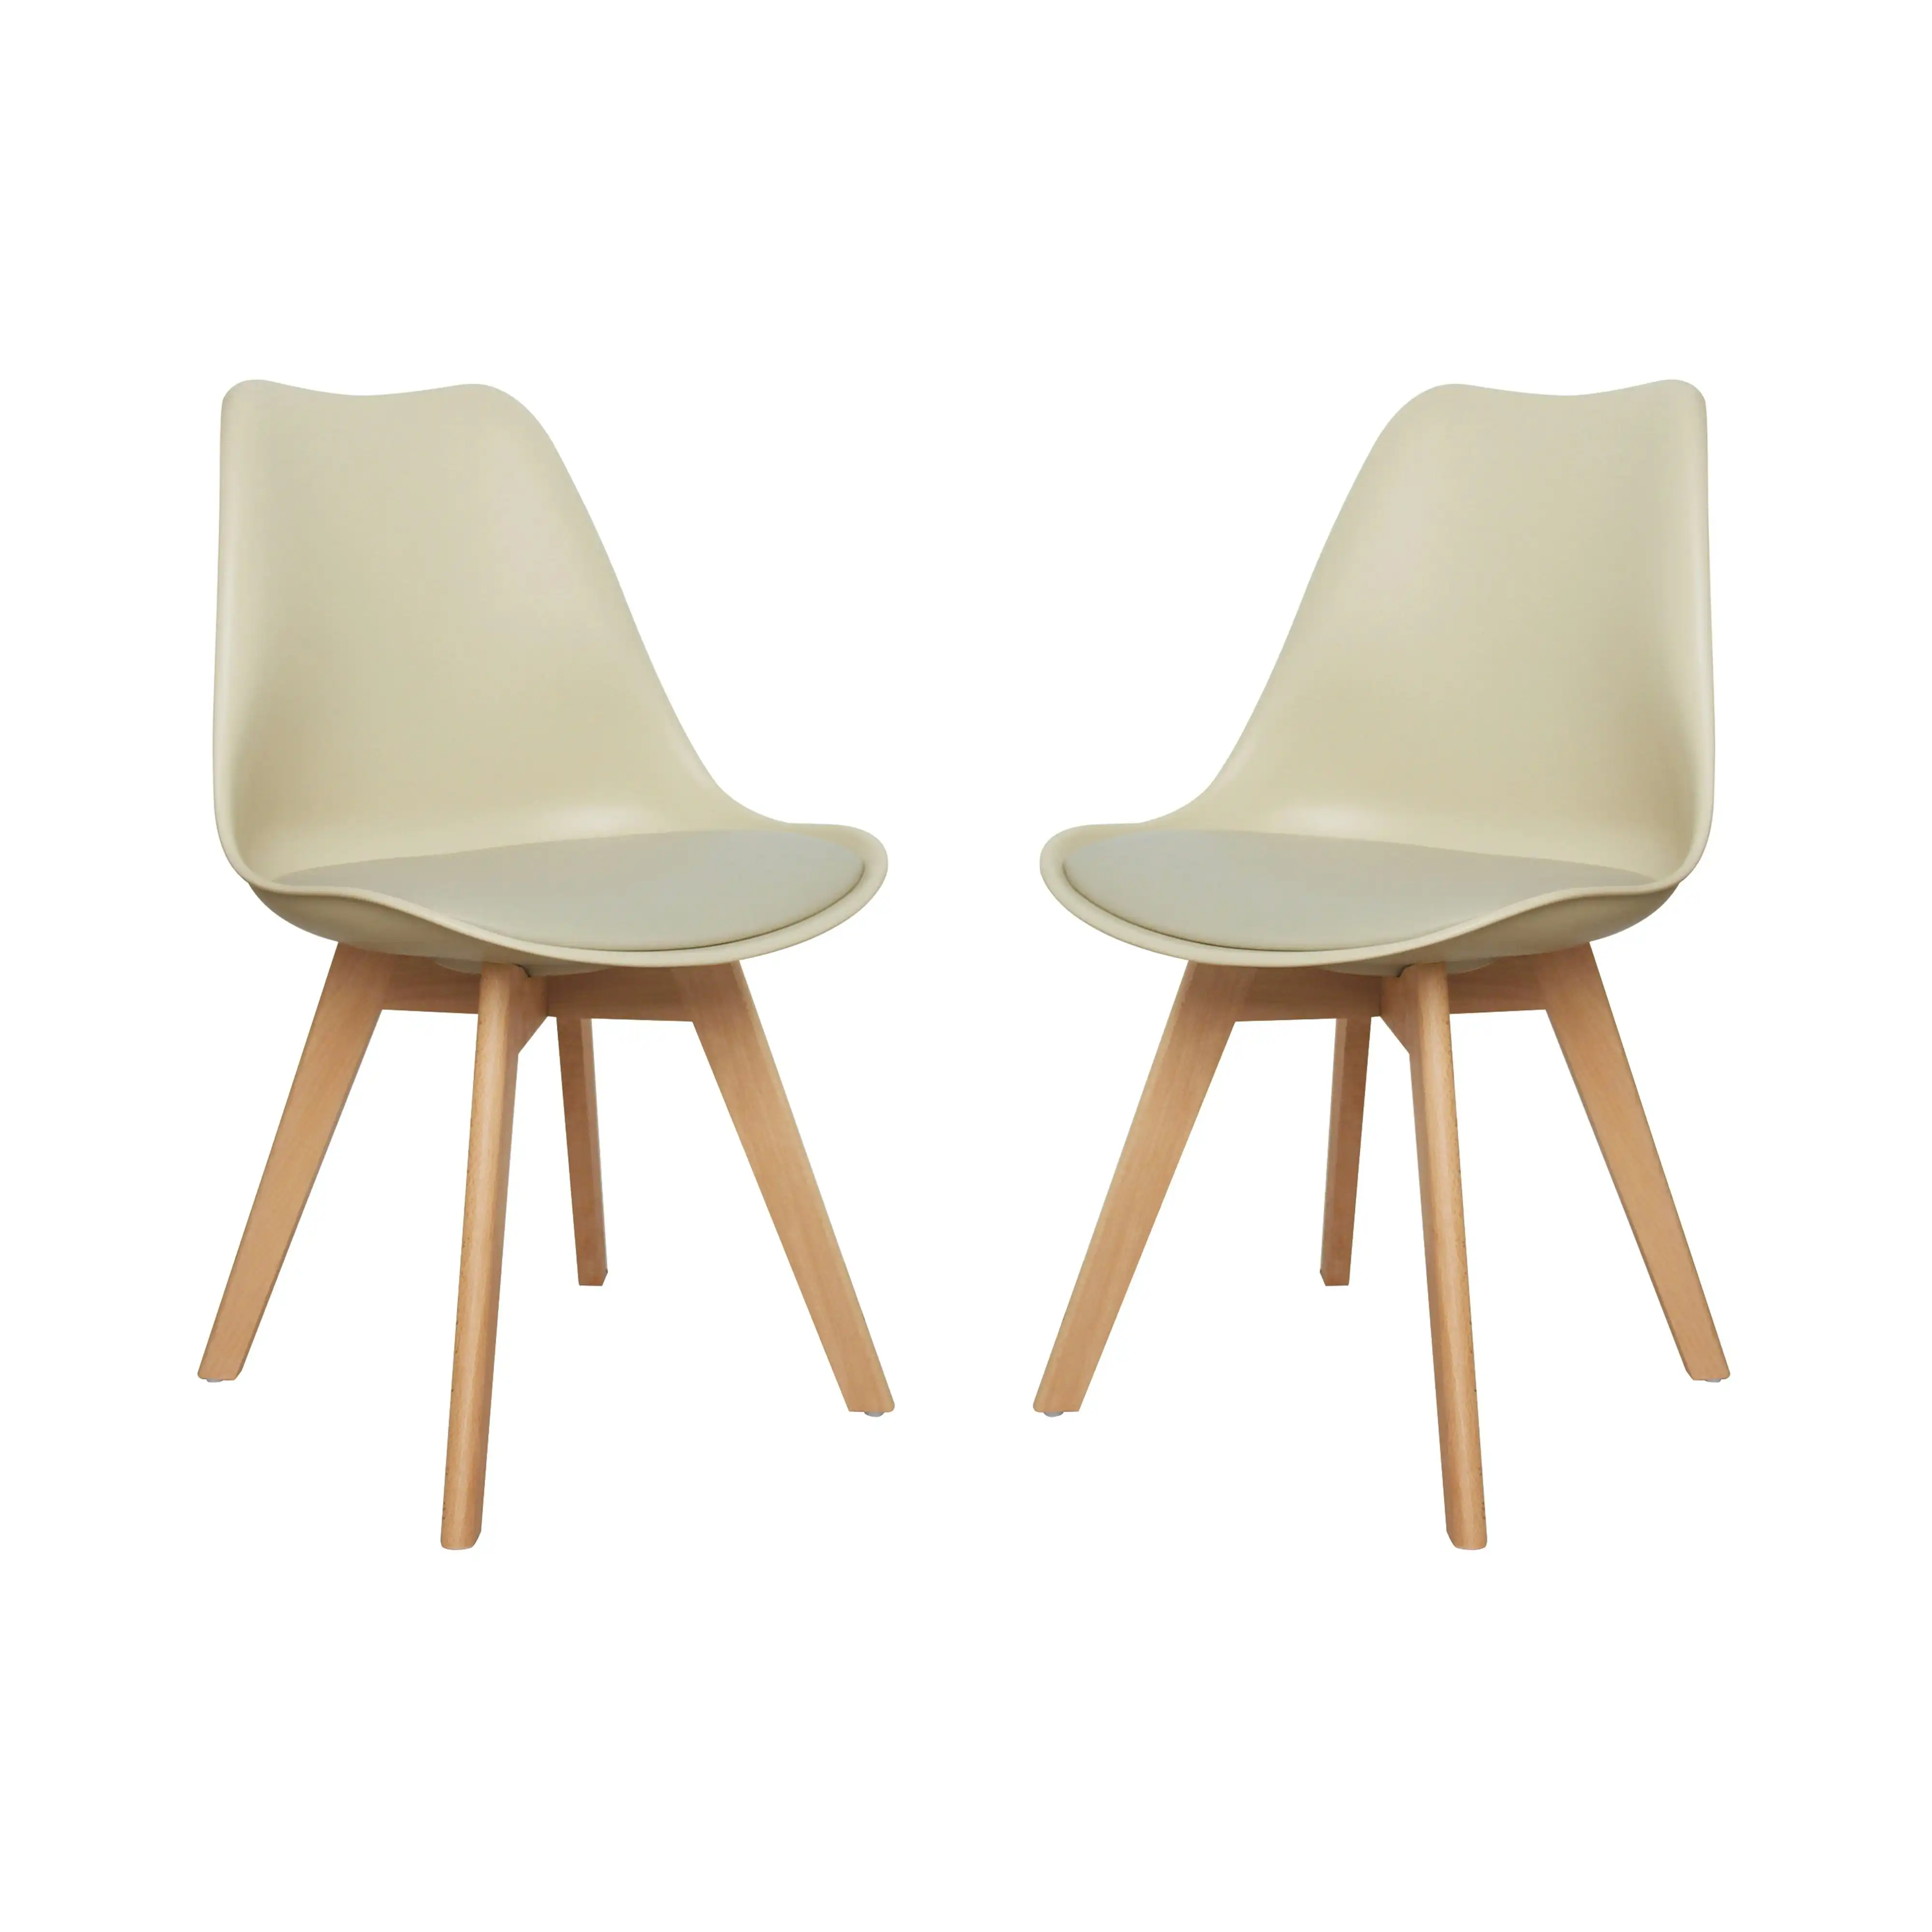 Chotto - Ando Dining Chairs - Beige x 2